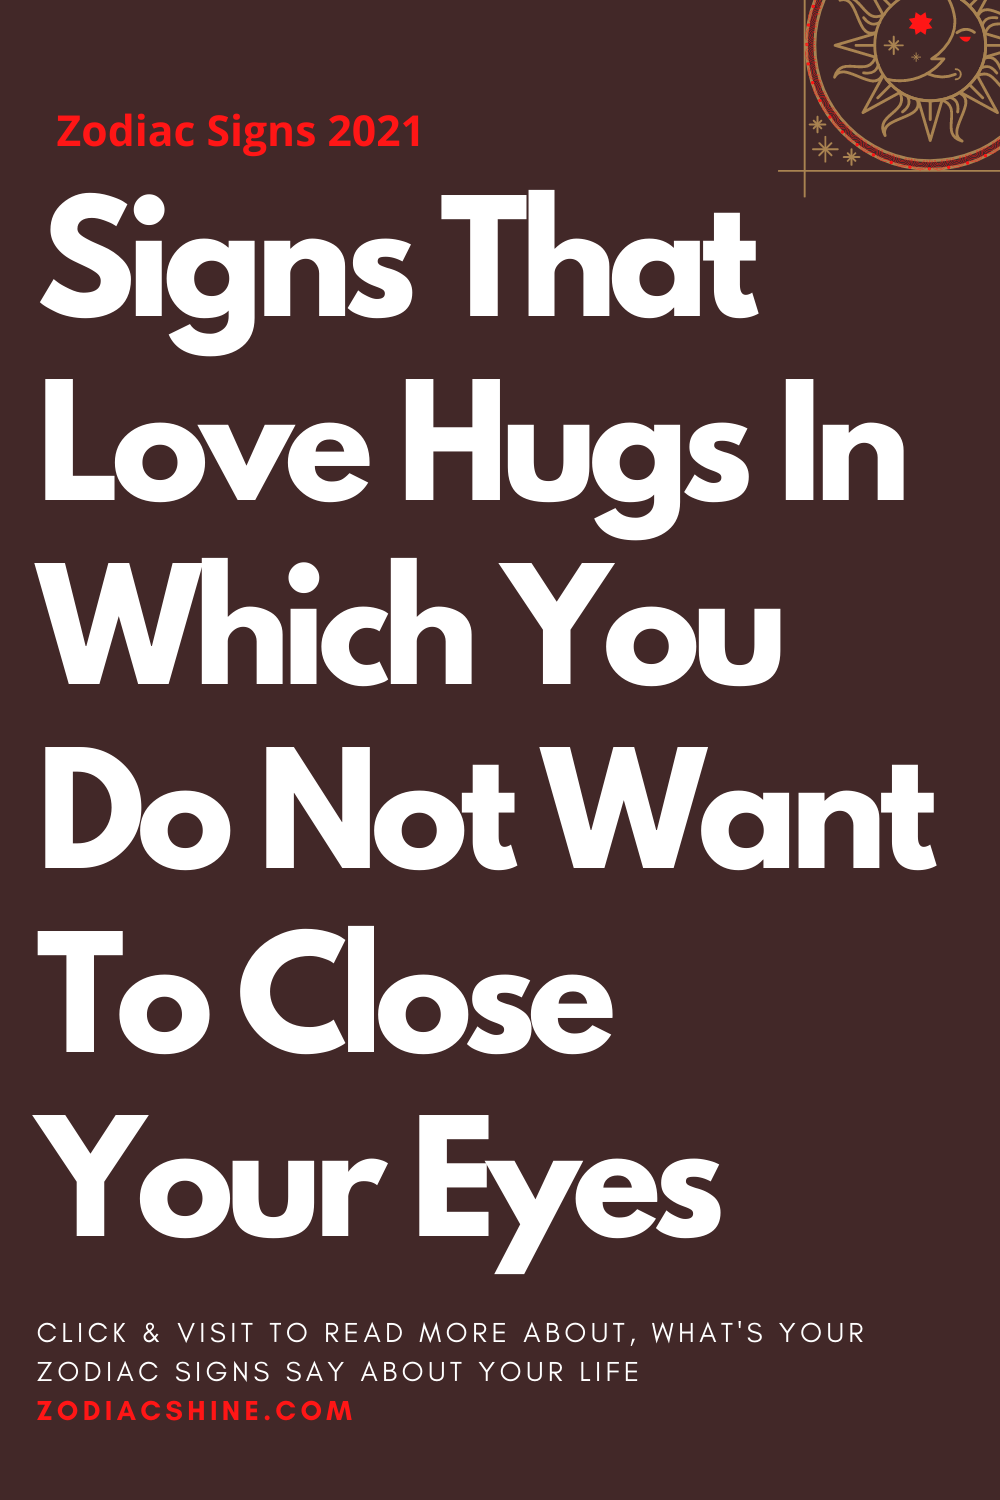 Signs That Love Hugs In Which You Do Not Want To Close Your Eyes